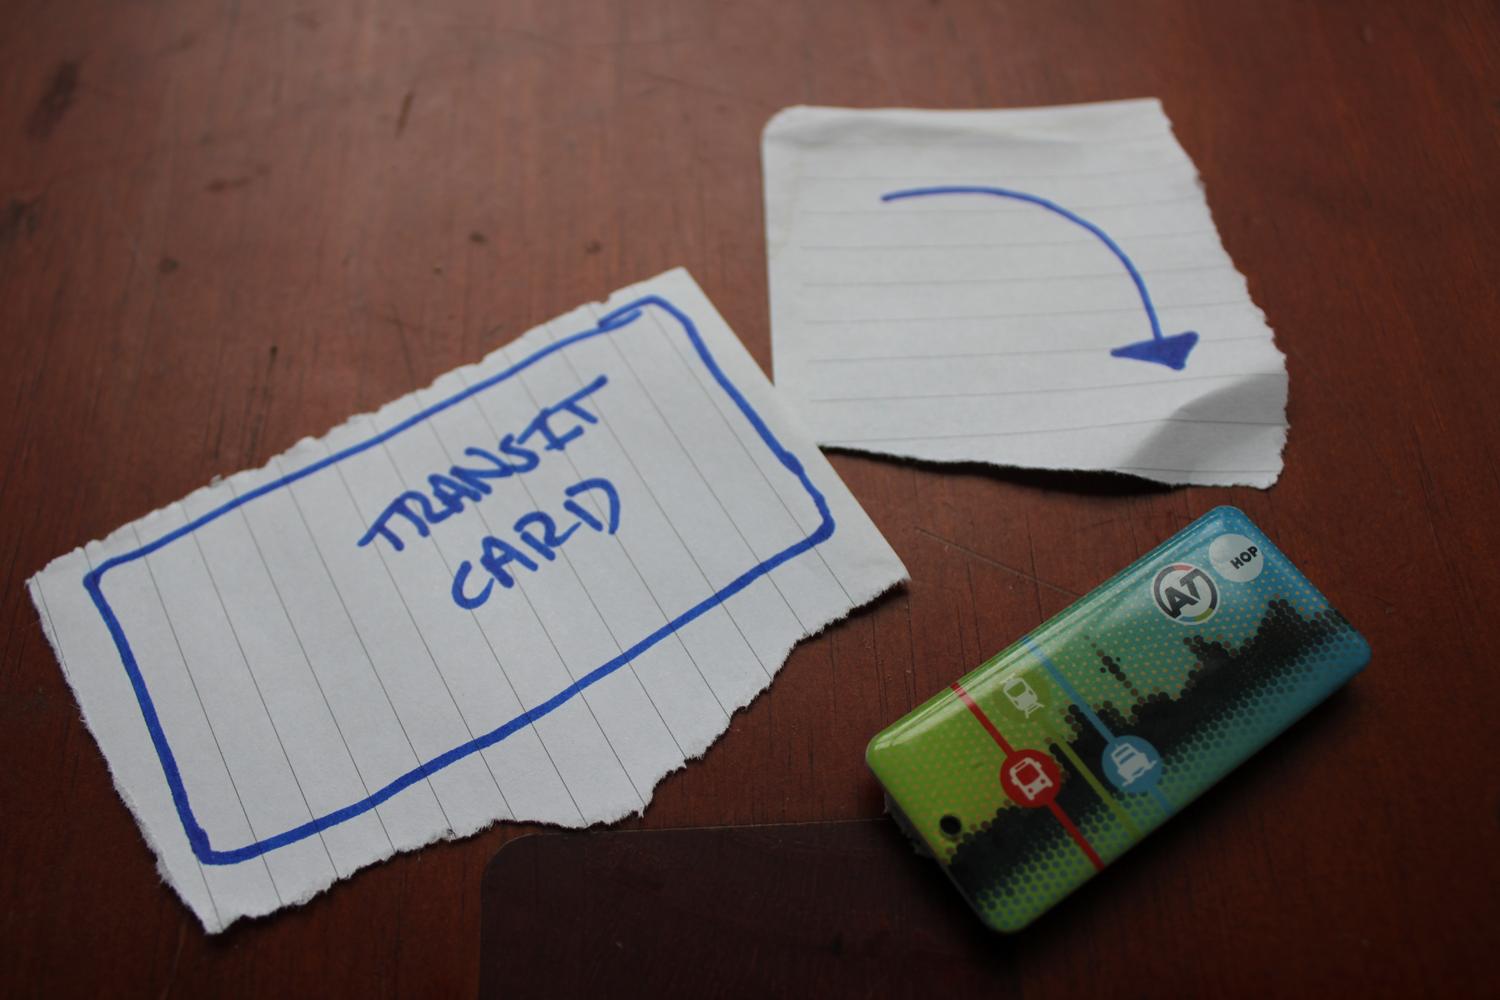 A close up photo of a table surface containing three items: A piece of paper representing my physical transit card, an arrow pointing to the right and a smaller, badge sized transit card designed for keychains. The arrow is supposed to symbolise that I've gone from one transit card to another.